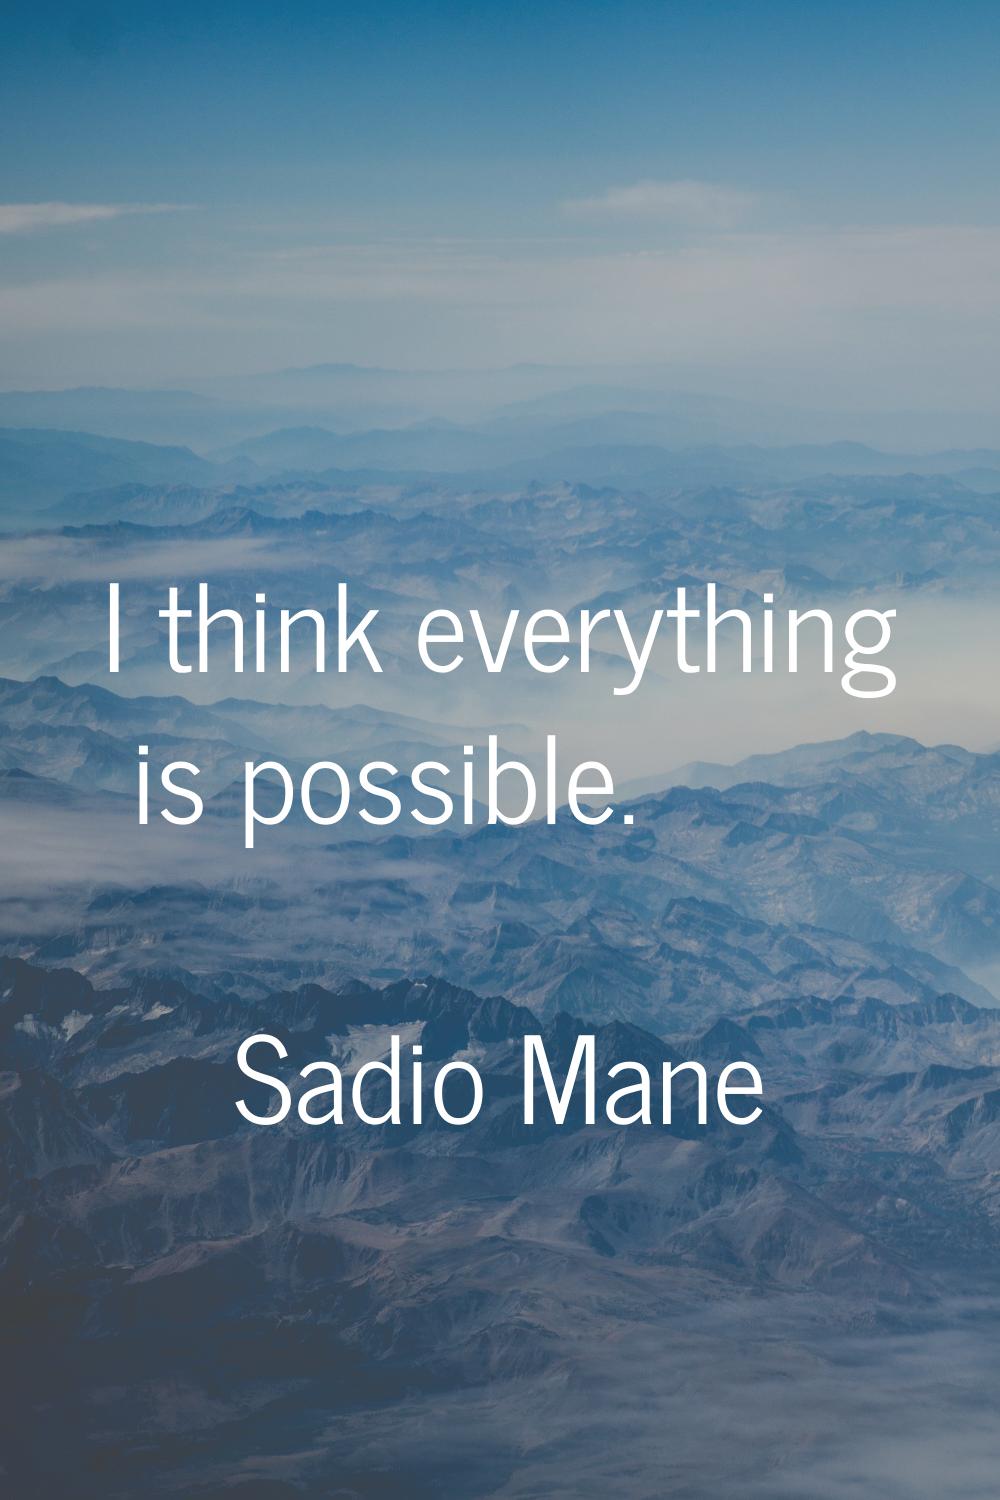 I think everything is possible.